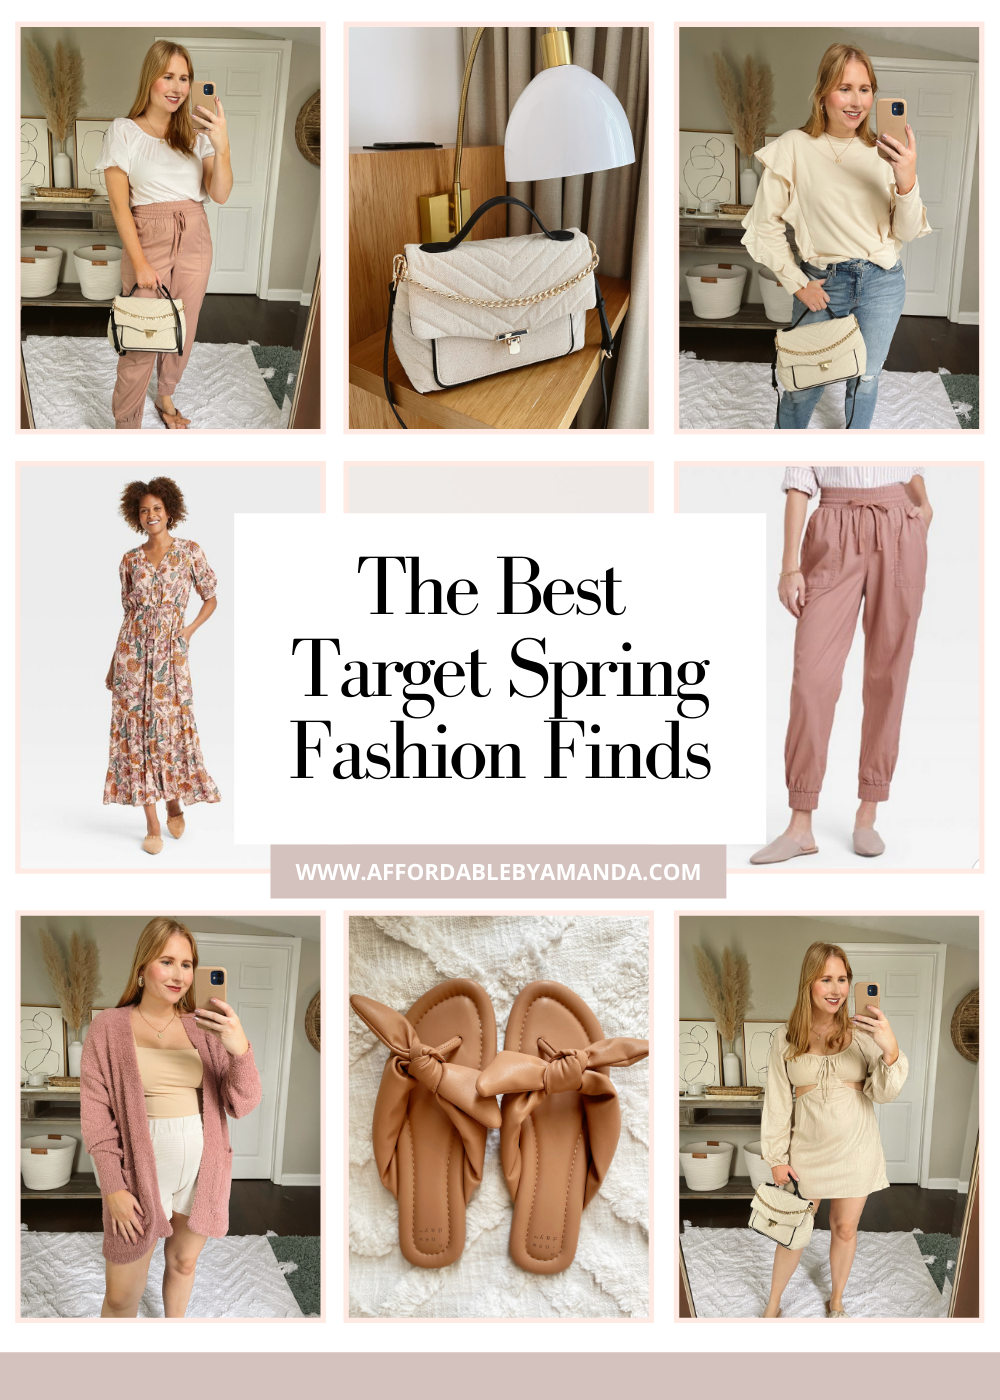 Spring Fashion Refresh: Affordable-Chic Finds for the Season - The